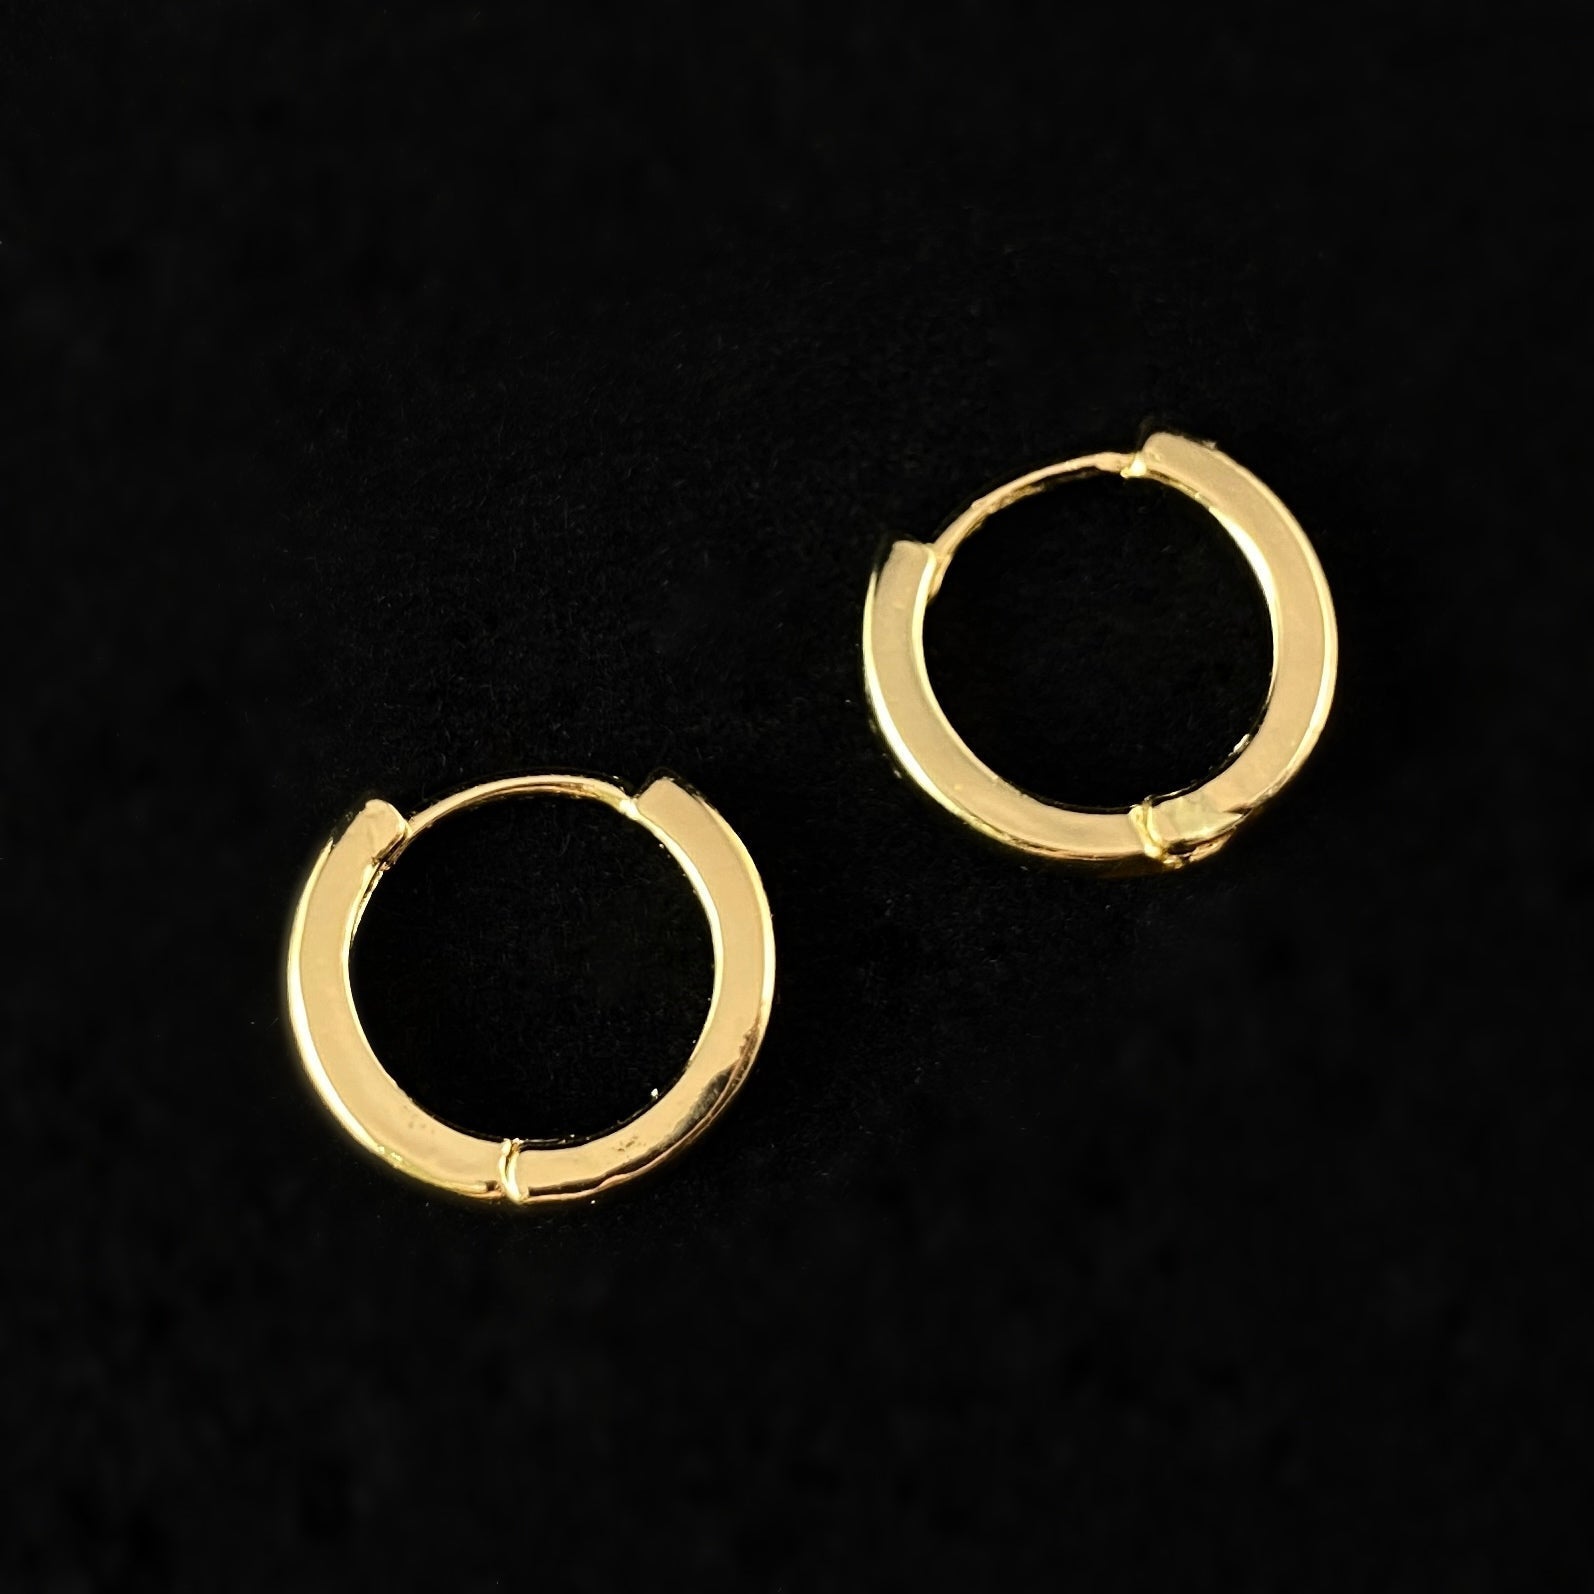 2-in-1 Smiley Face 90s Fashion Inspired Hoop Earrings -